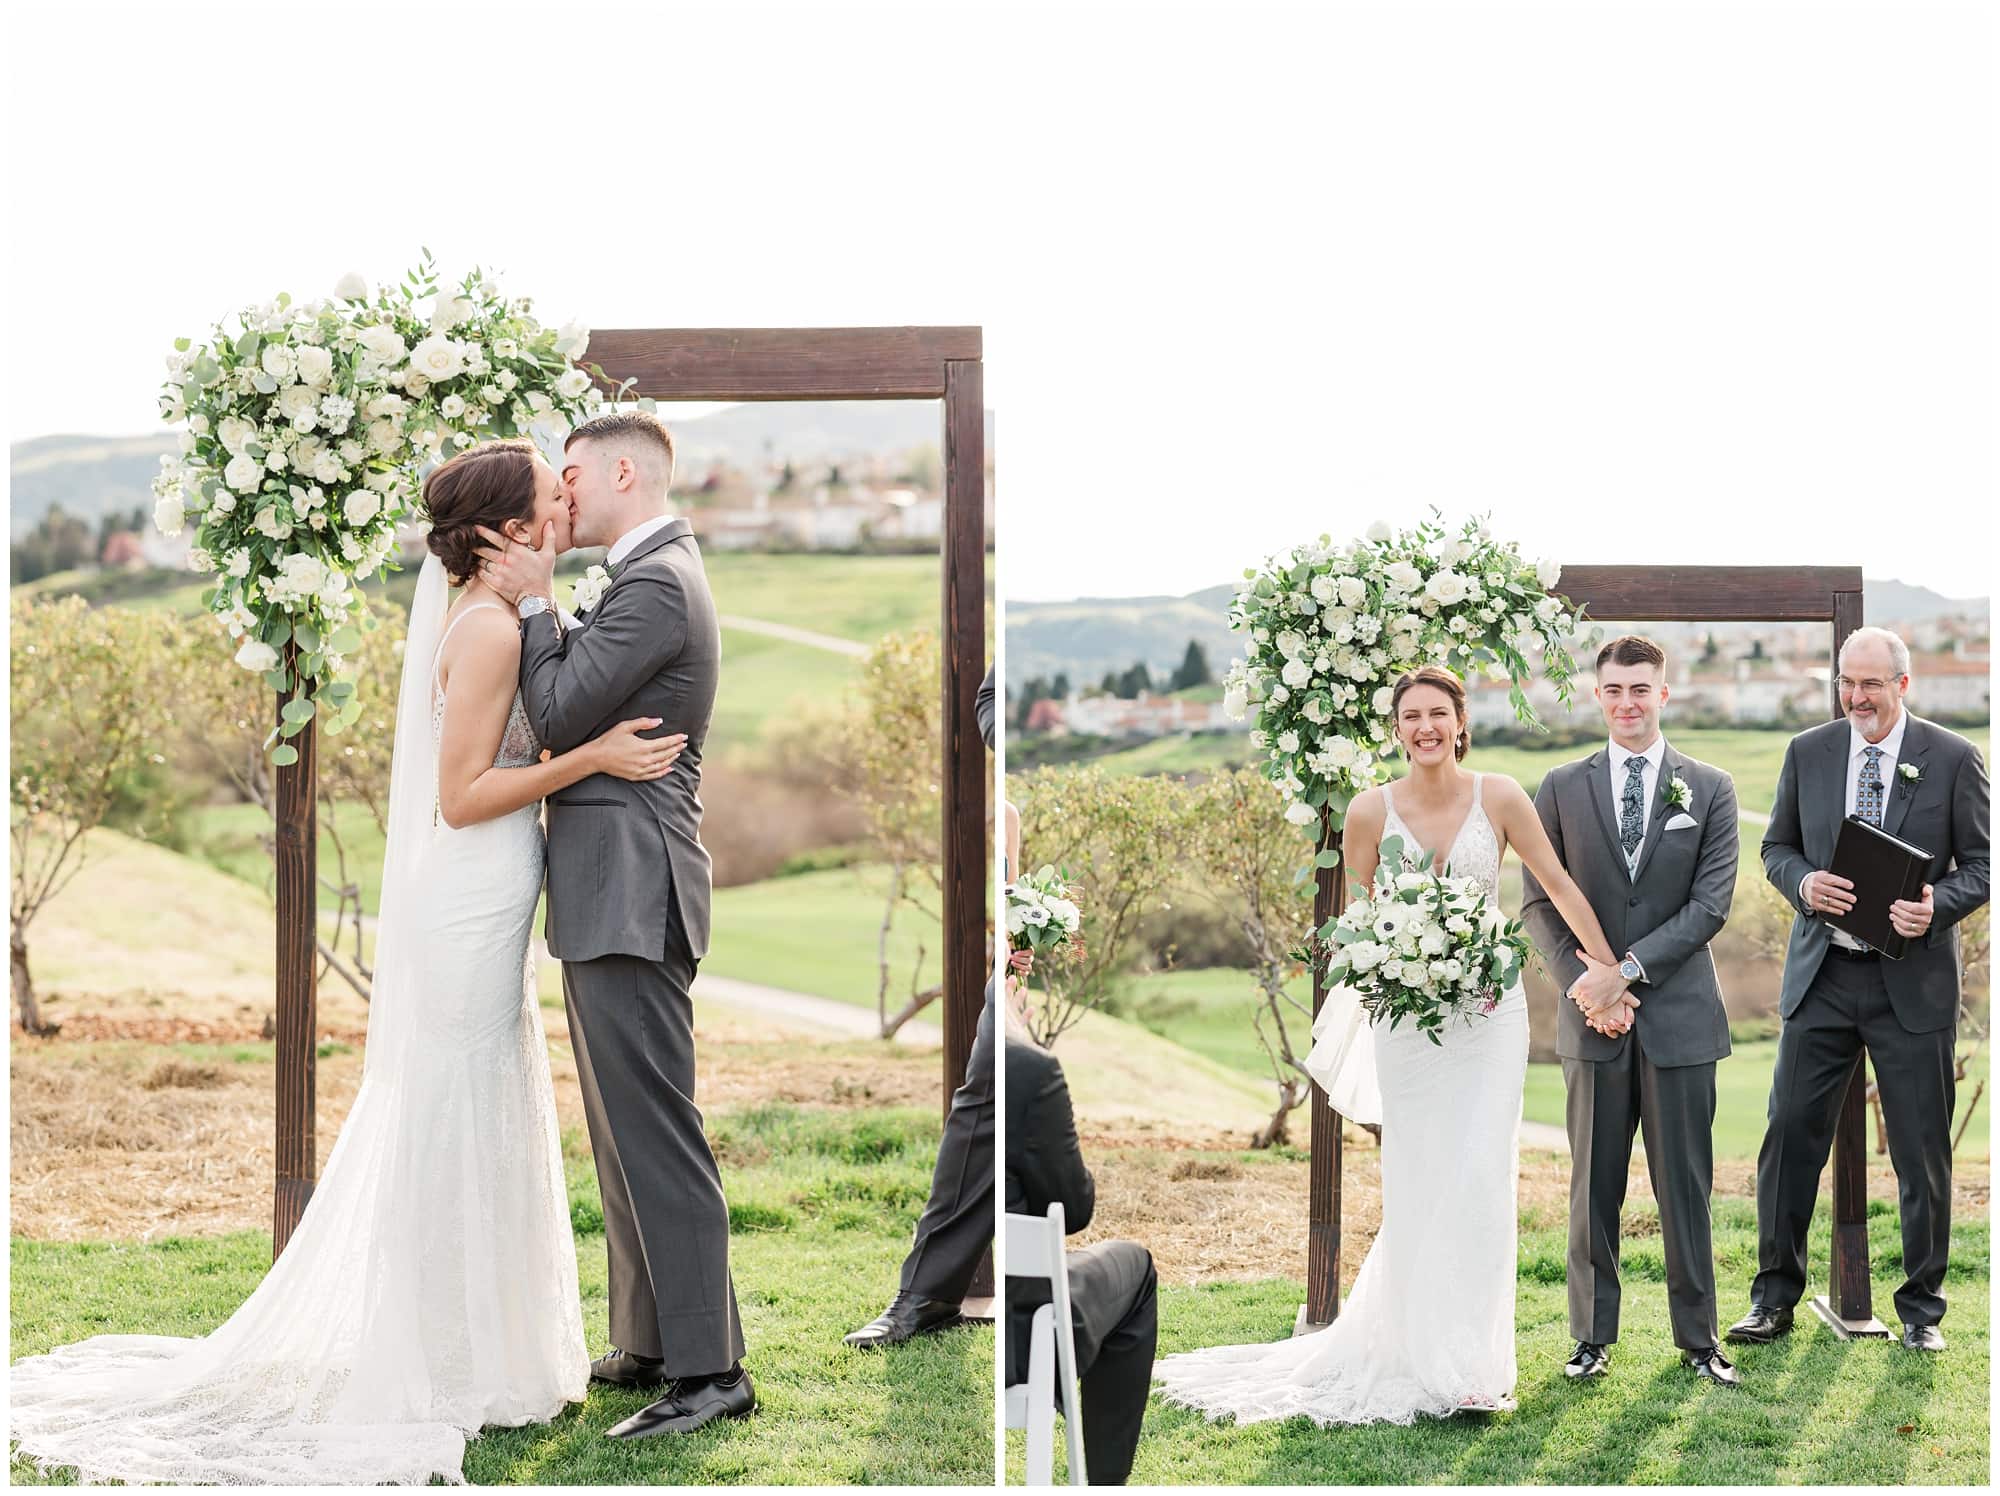 First kiss at ceremony